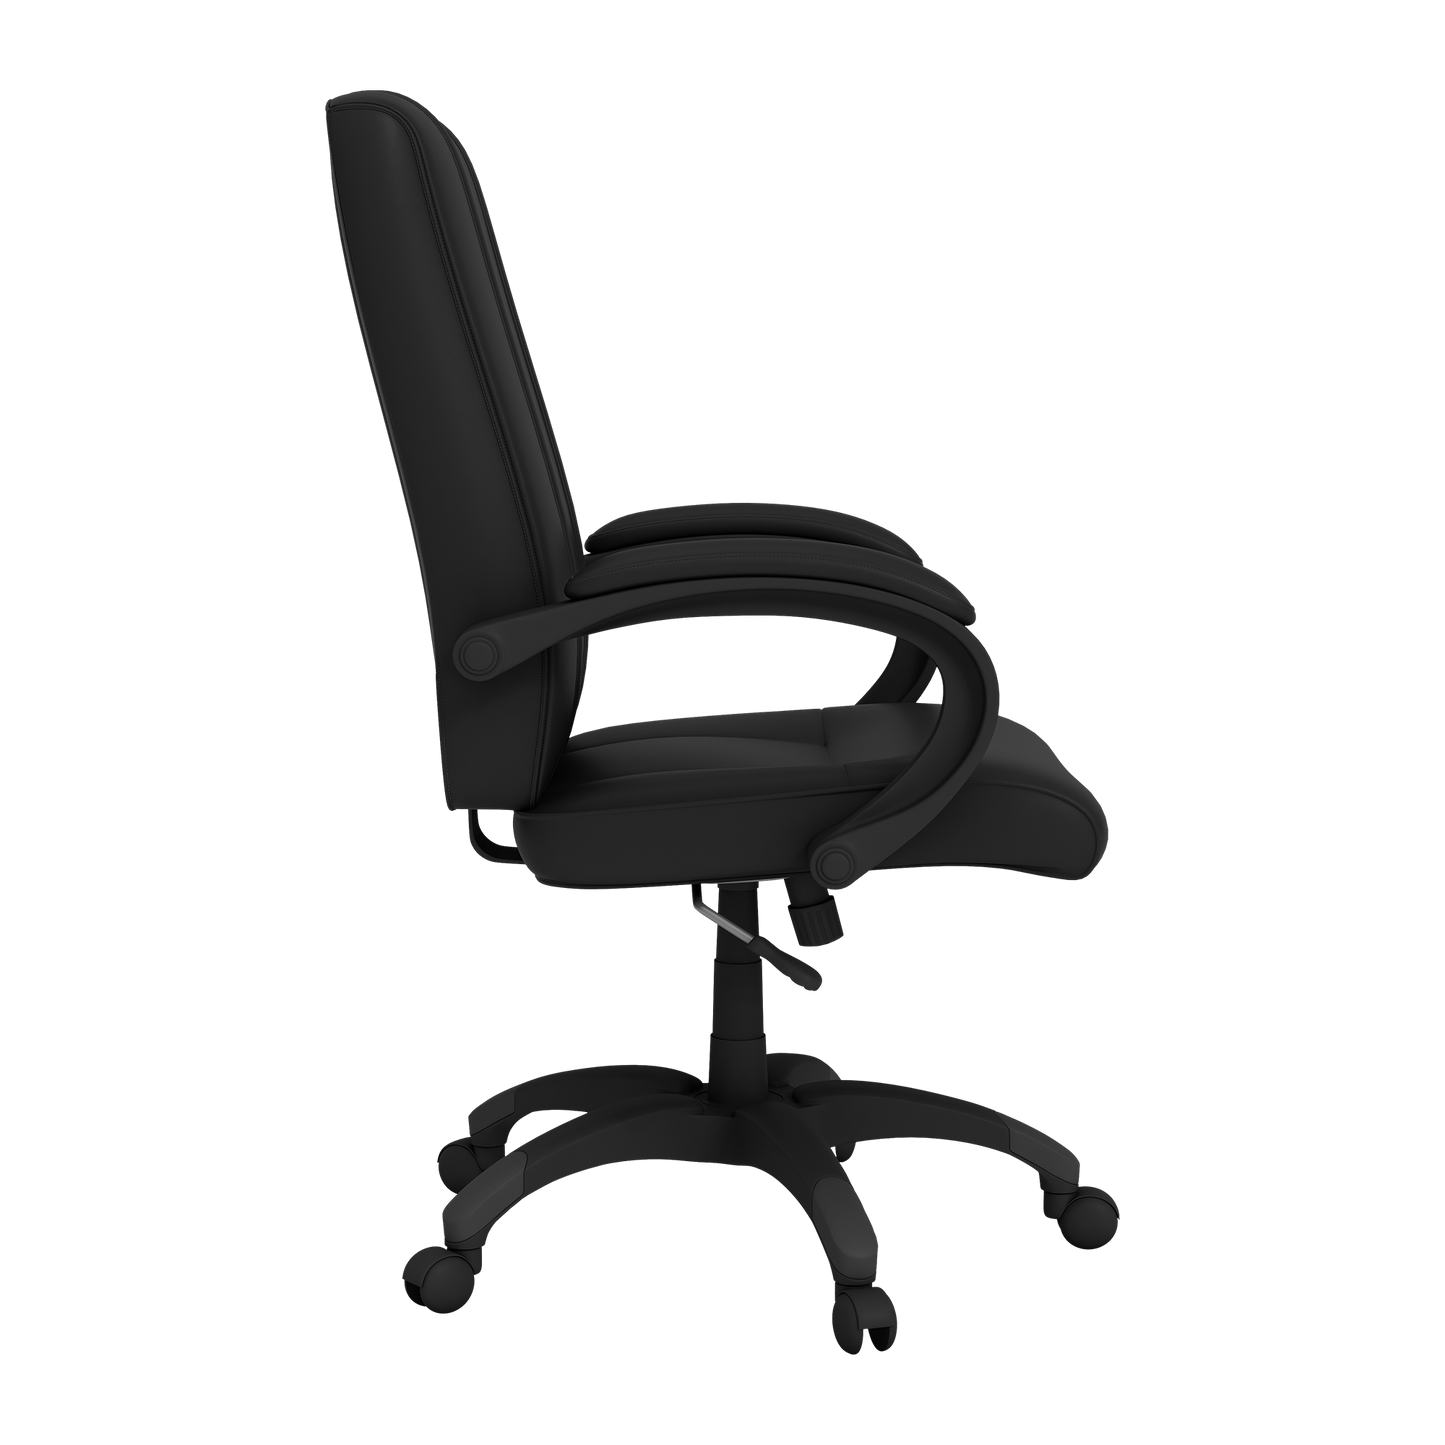 Office Chair 1000 with Corvette C7 Logo